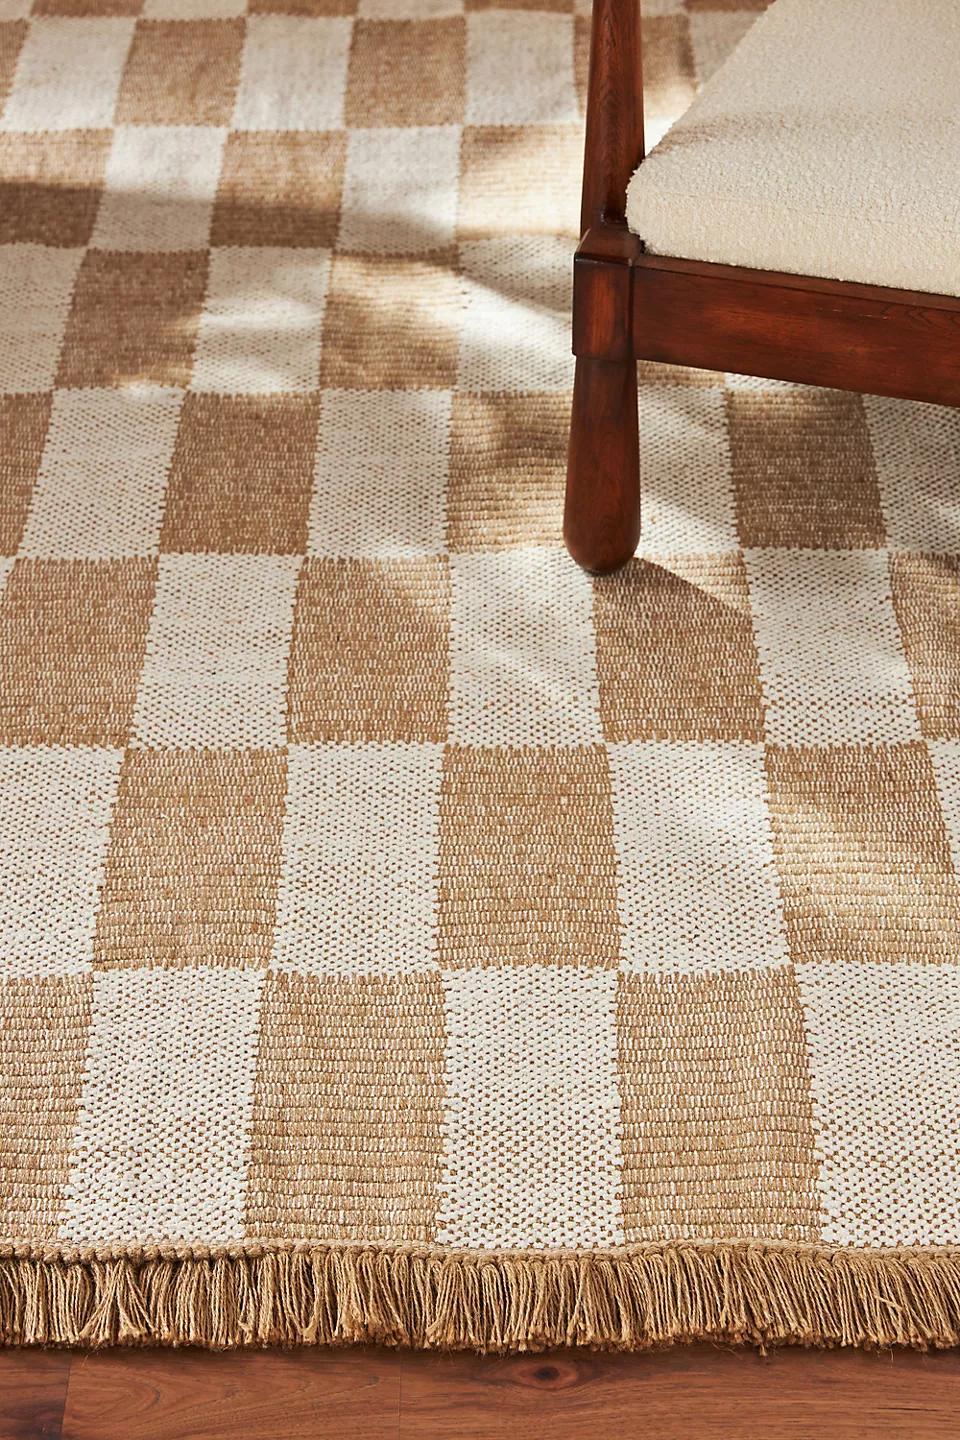 Checkered Jute Rug, Amber Lewis for Anthropologie